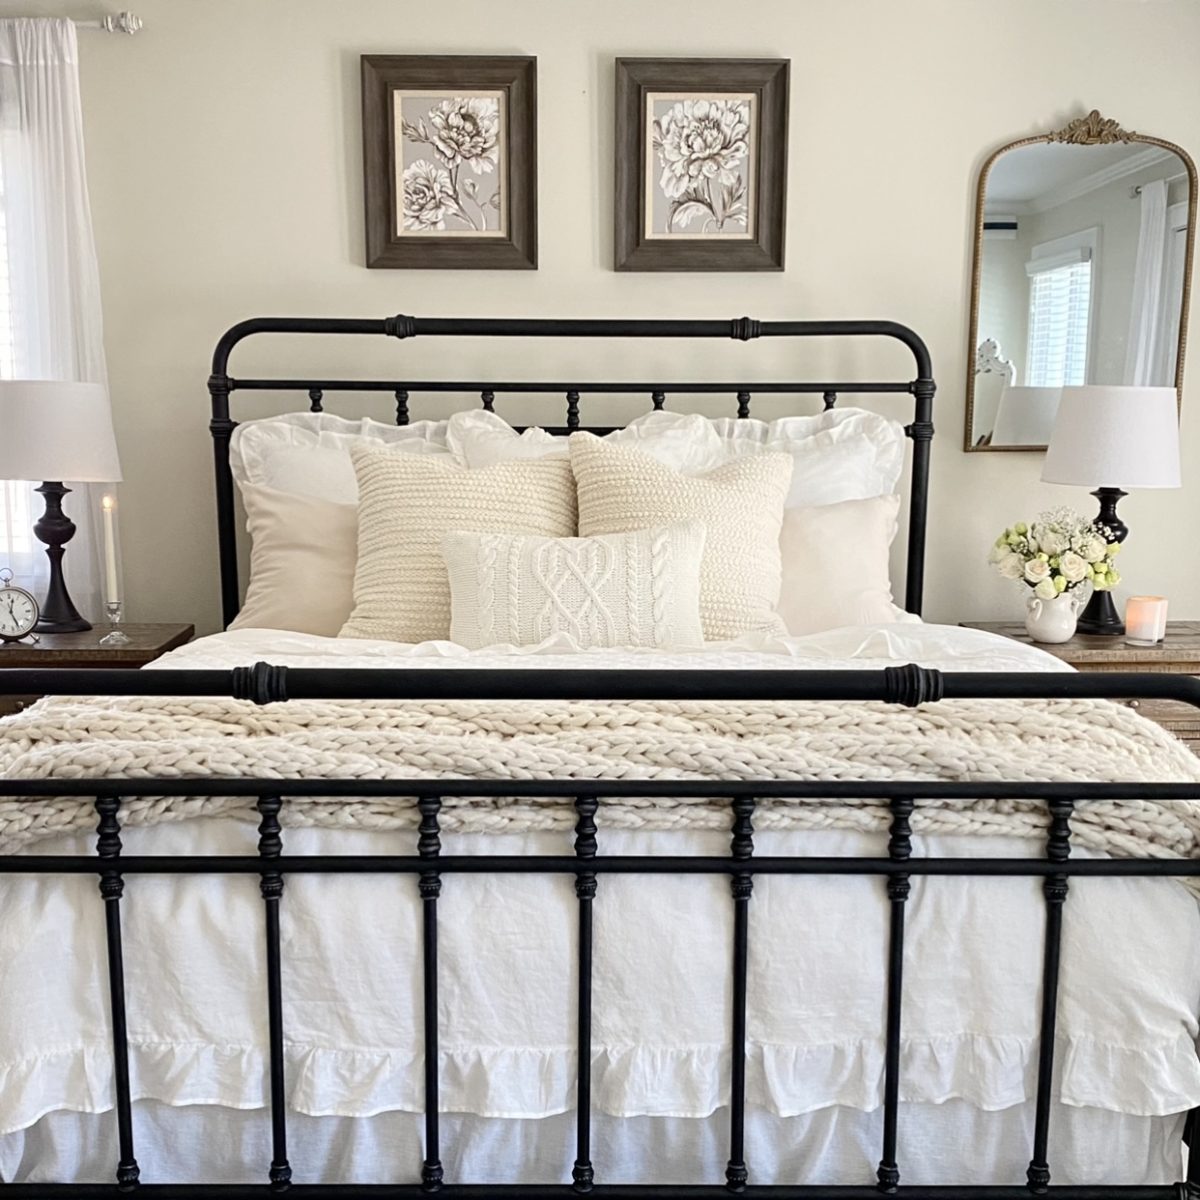 Layered winter white bedding on an iron bed.